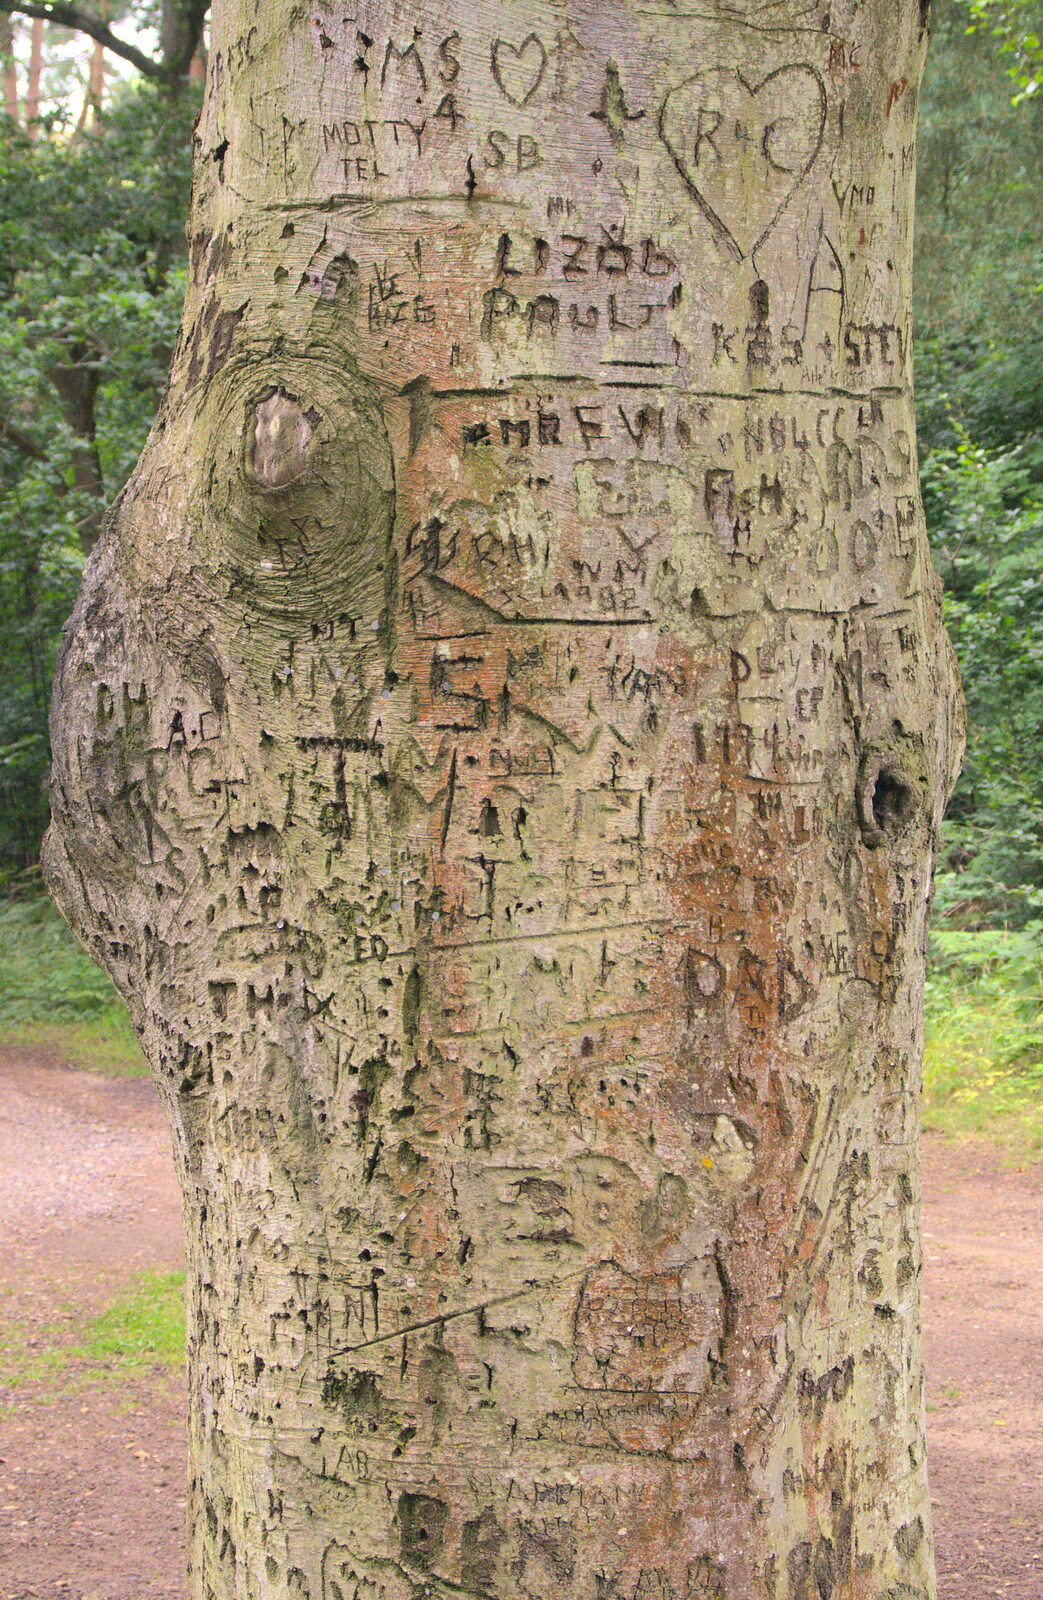 A graffiti'd tree from Camping at Dower House, West Harling, Norfolk - 1st September 2012